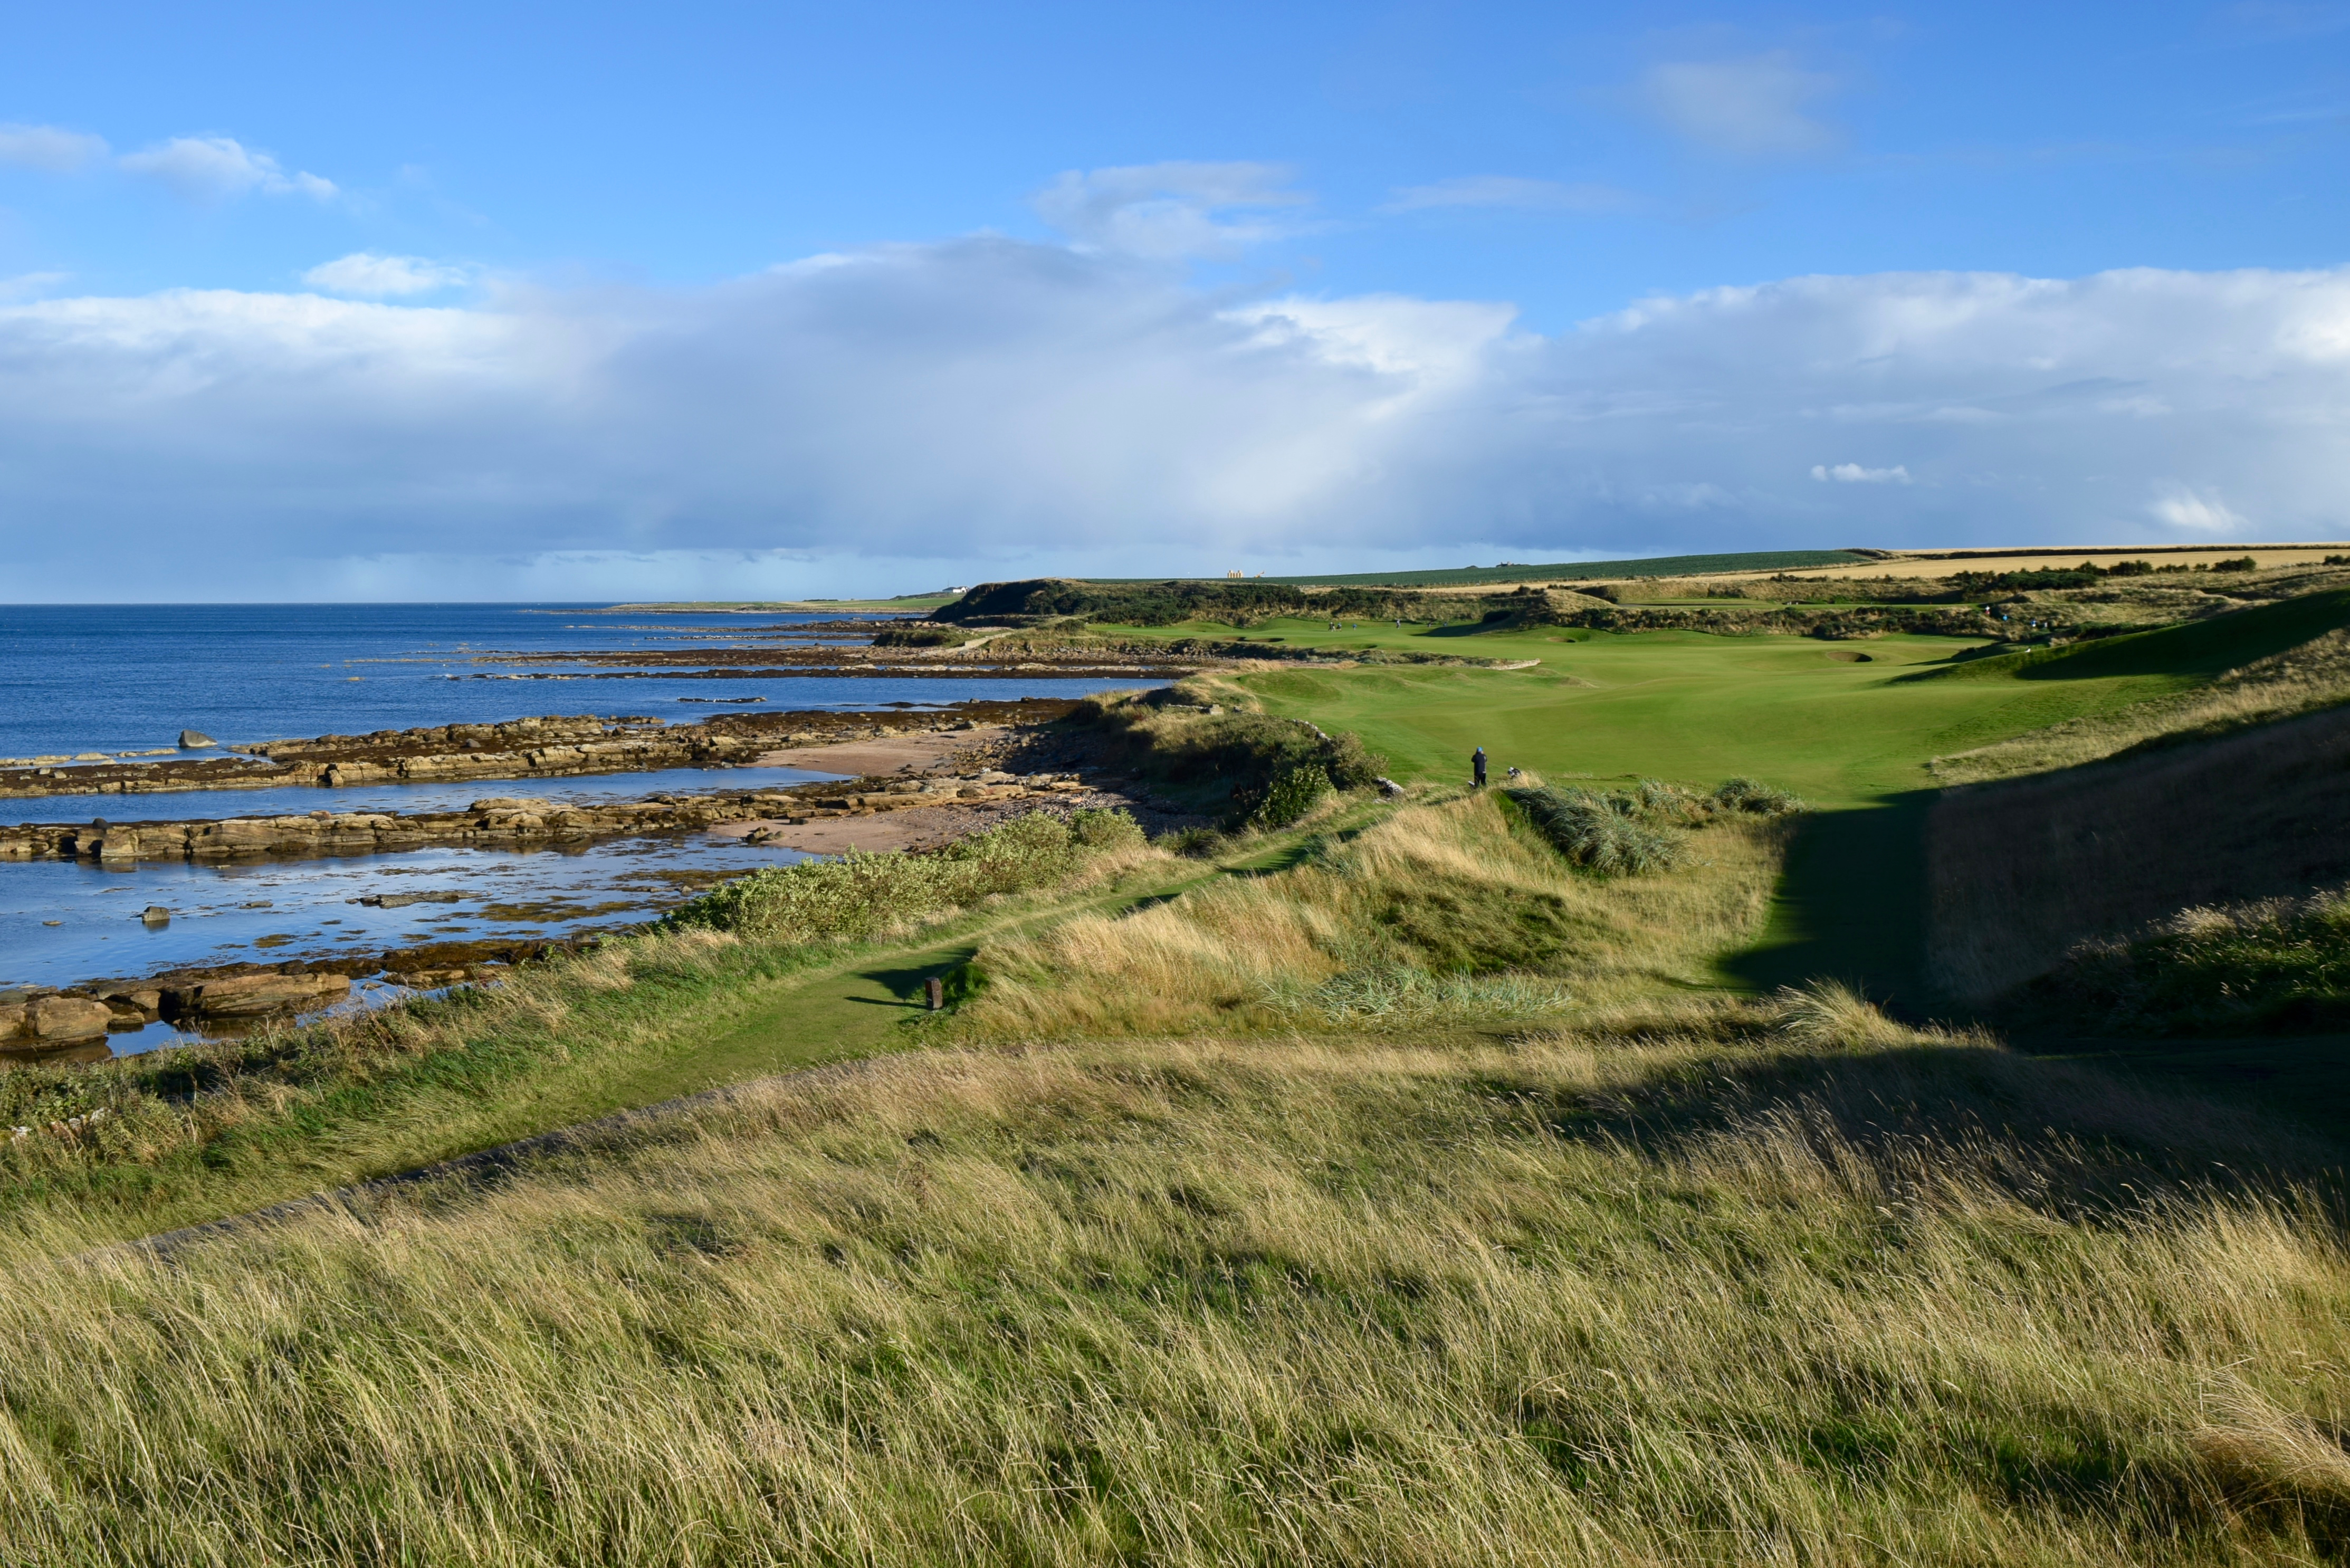 Scotland, day seven: Spectacular Kingsbarns Golf Links (and a visit to the Old Course)